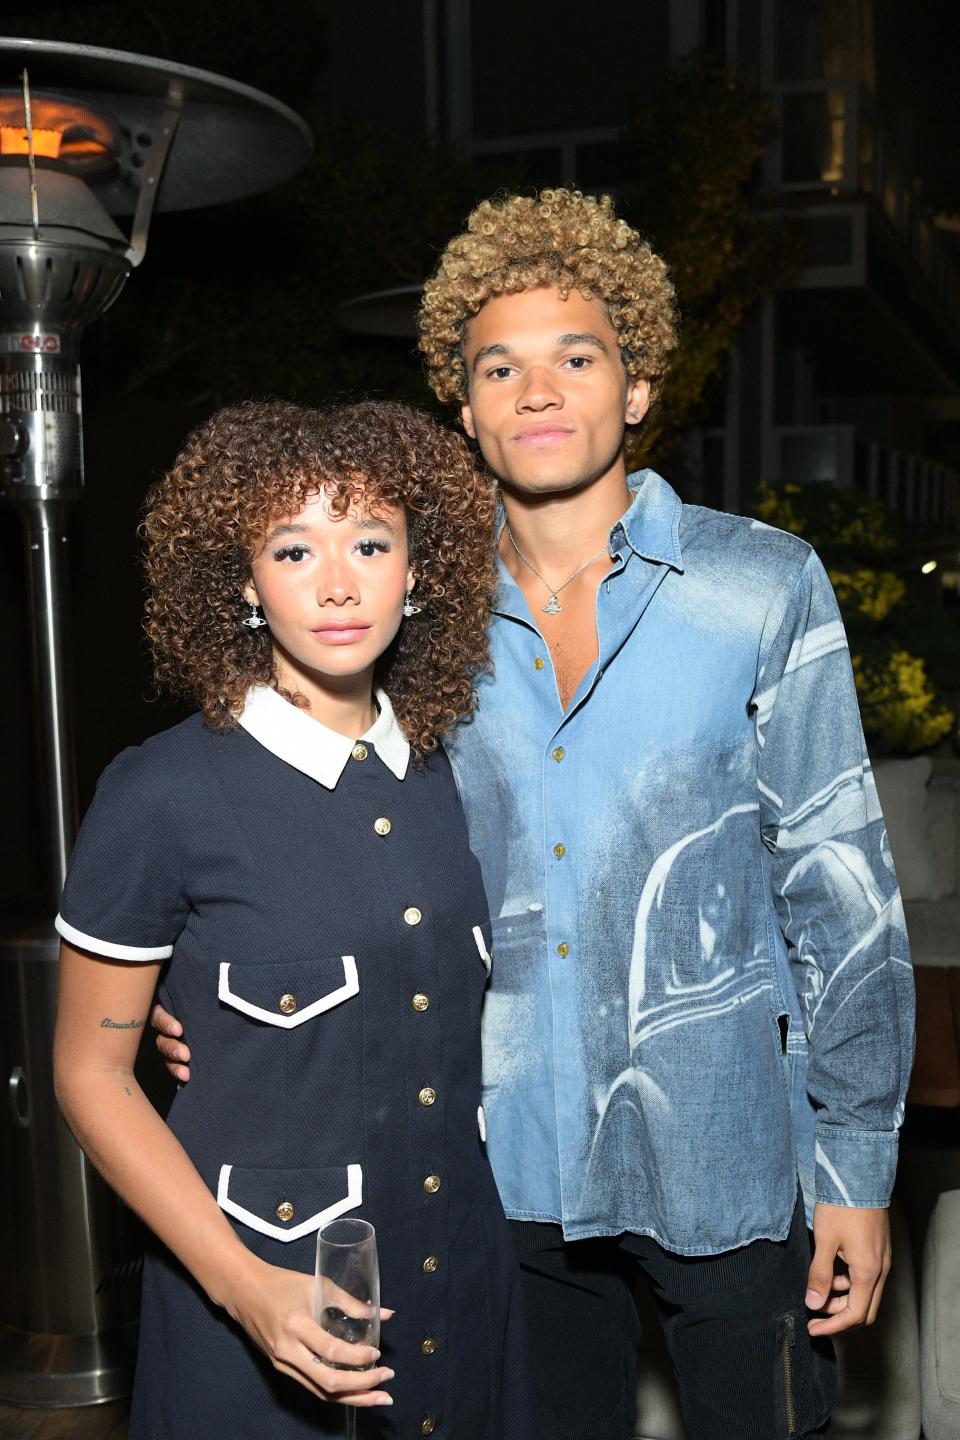 MALIBU, CALIFORNIA - NOVEMBER 03: Armani Jackson and Talia Jackson attends the Clarins exclusive dinner at Nobu Malibu on November 03, 2023 in Malibu, California. (Photo by Charley Gallay/Getty Images for Clarins)